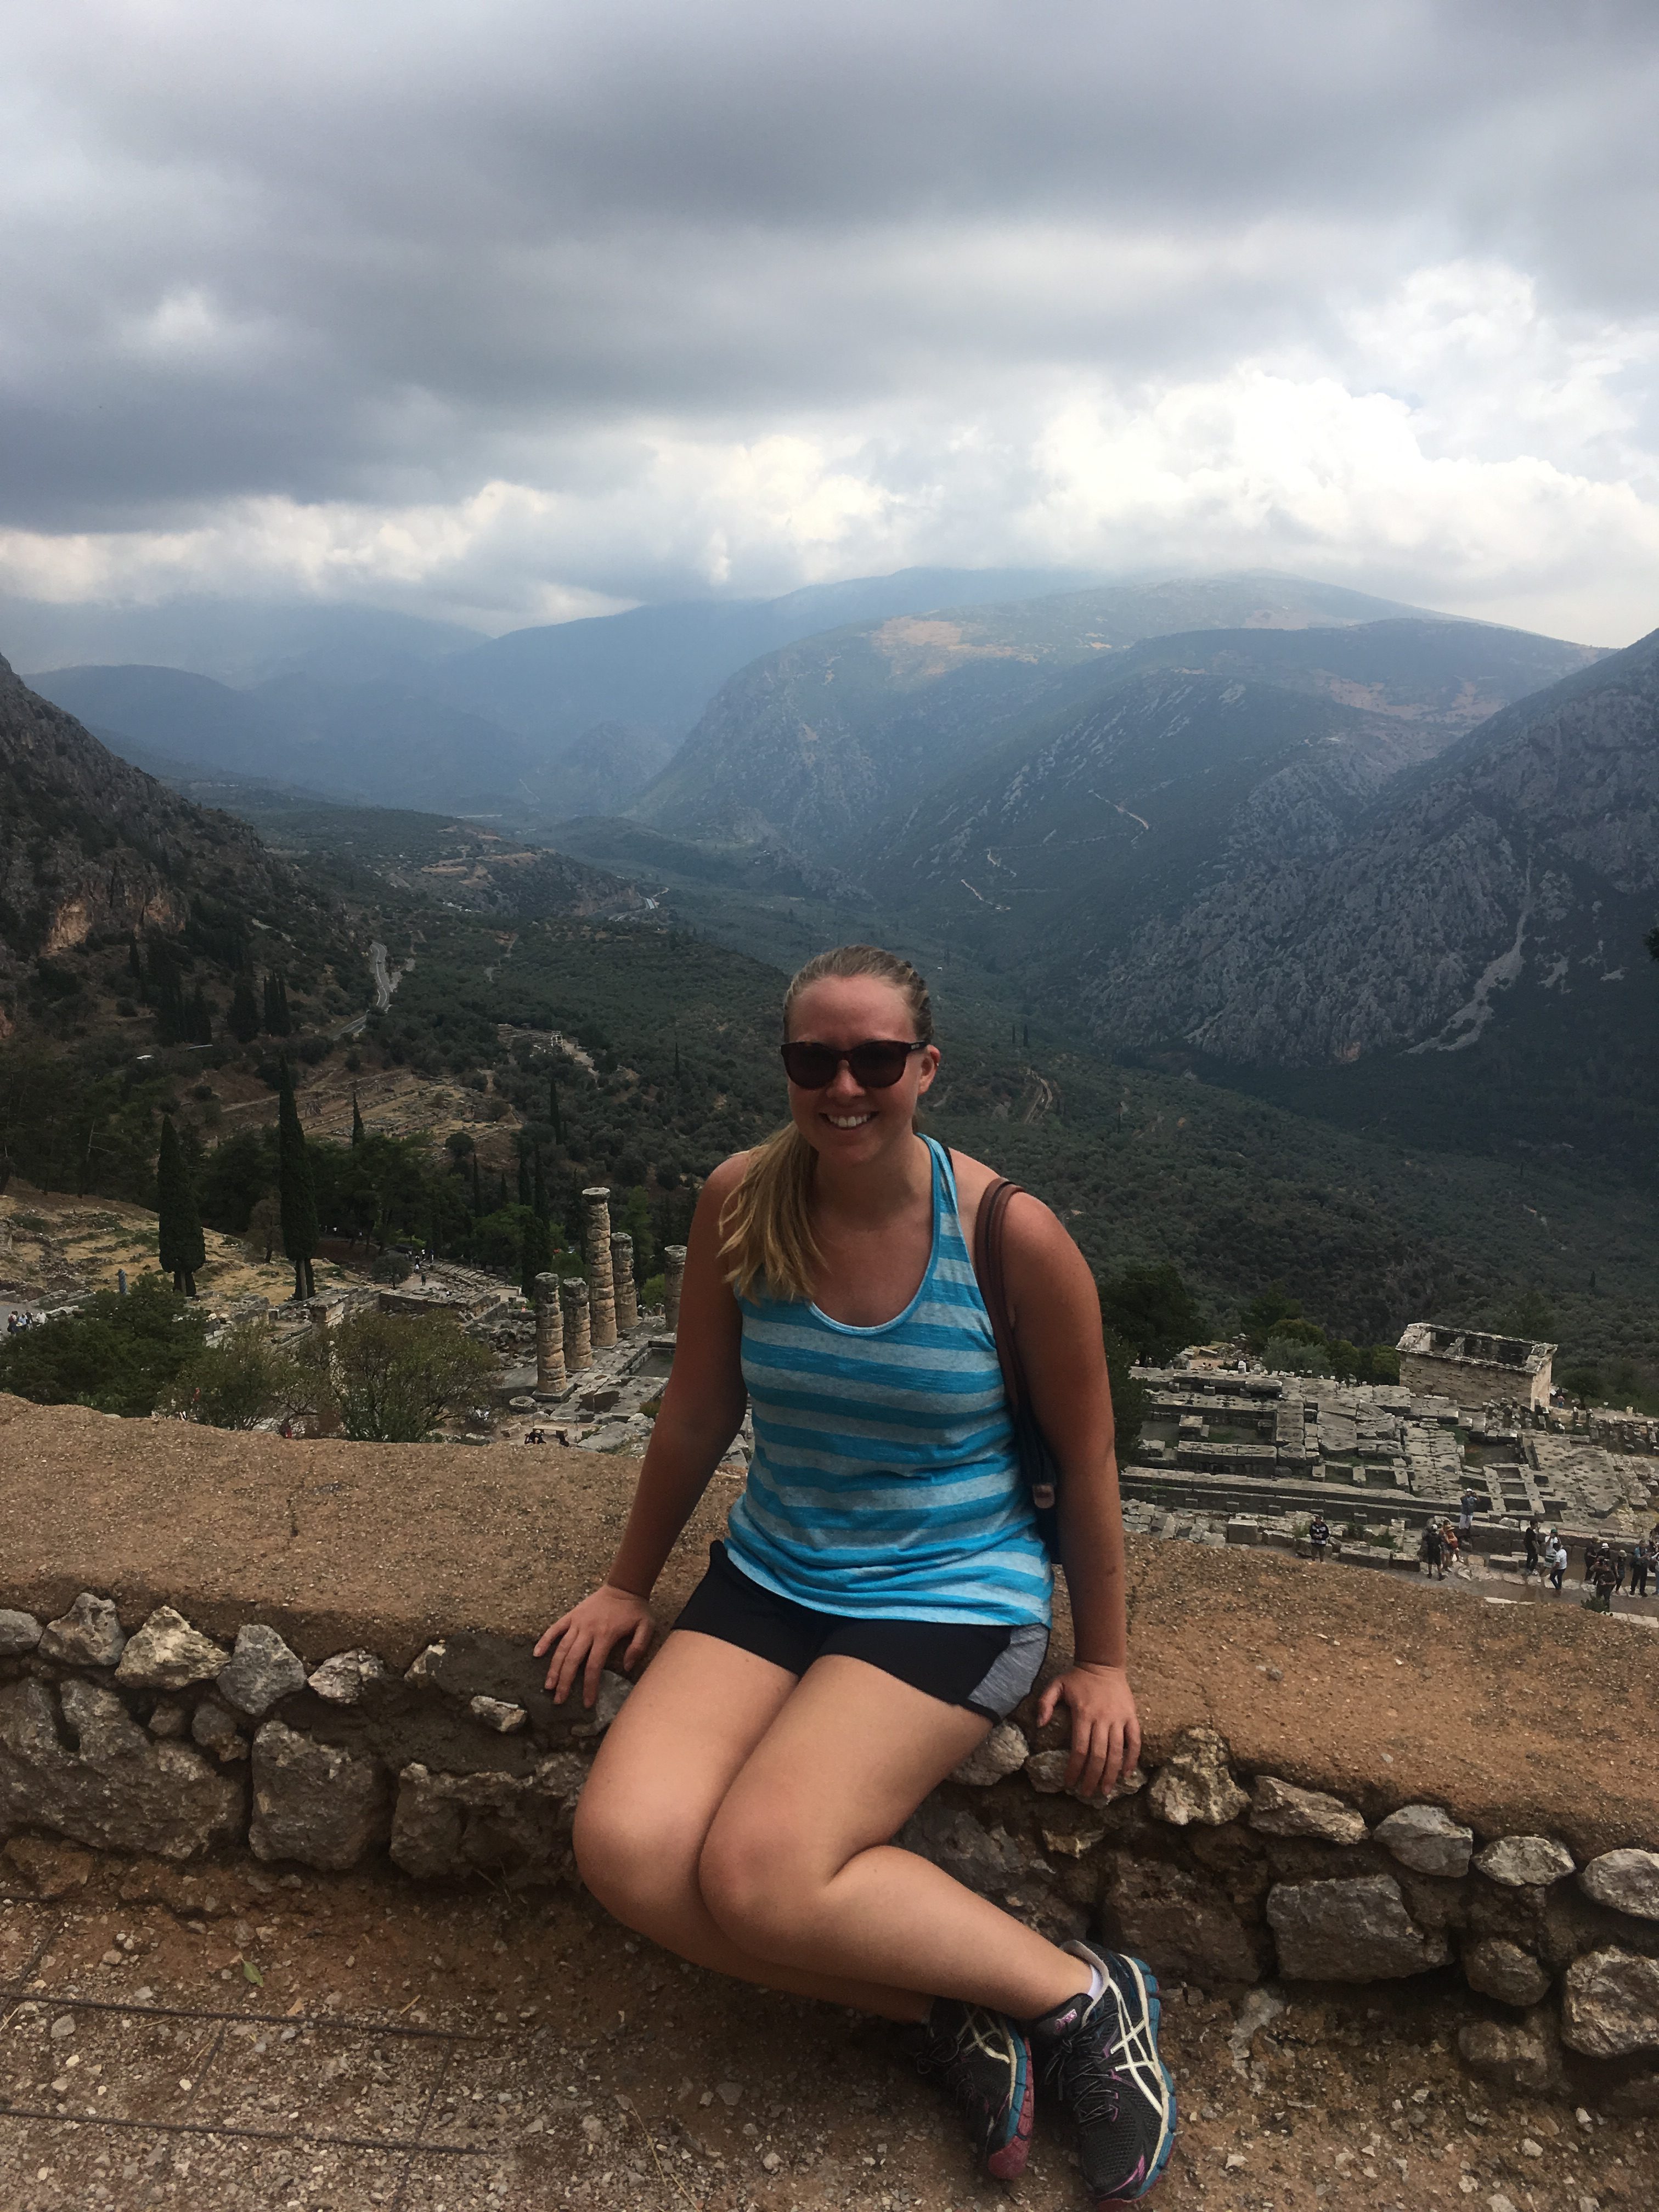 Overlooking Temple of Apollo at Delphi, Greece